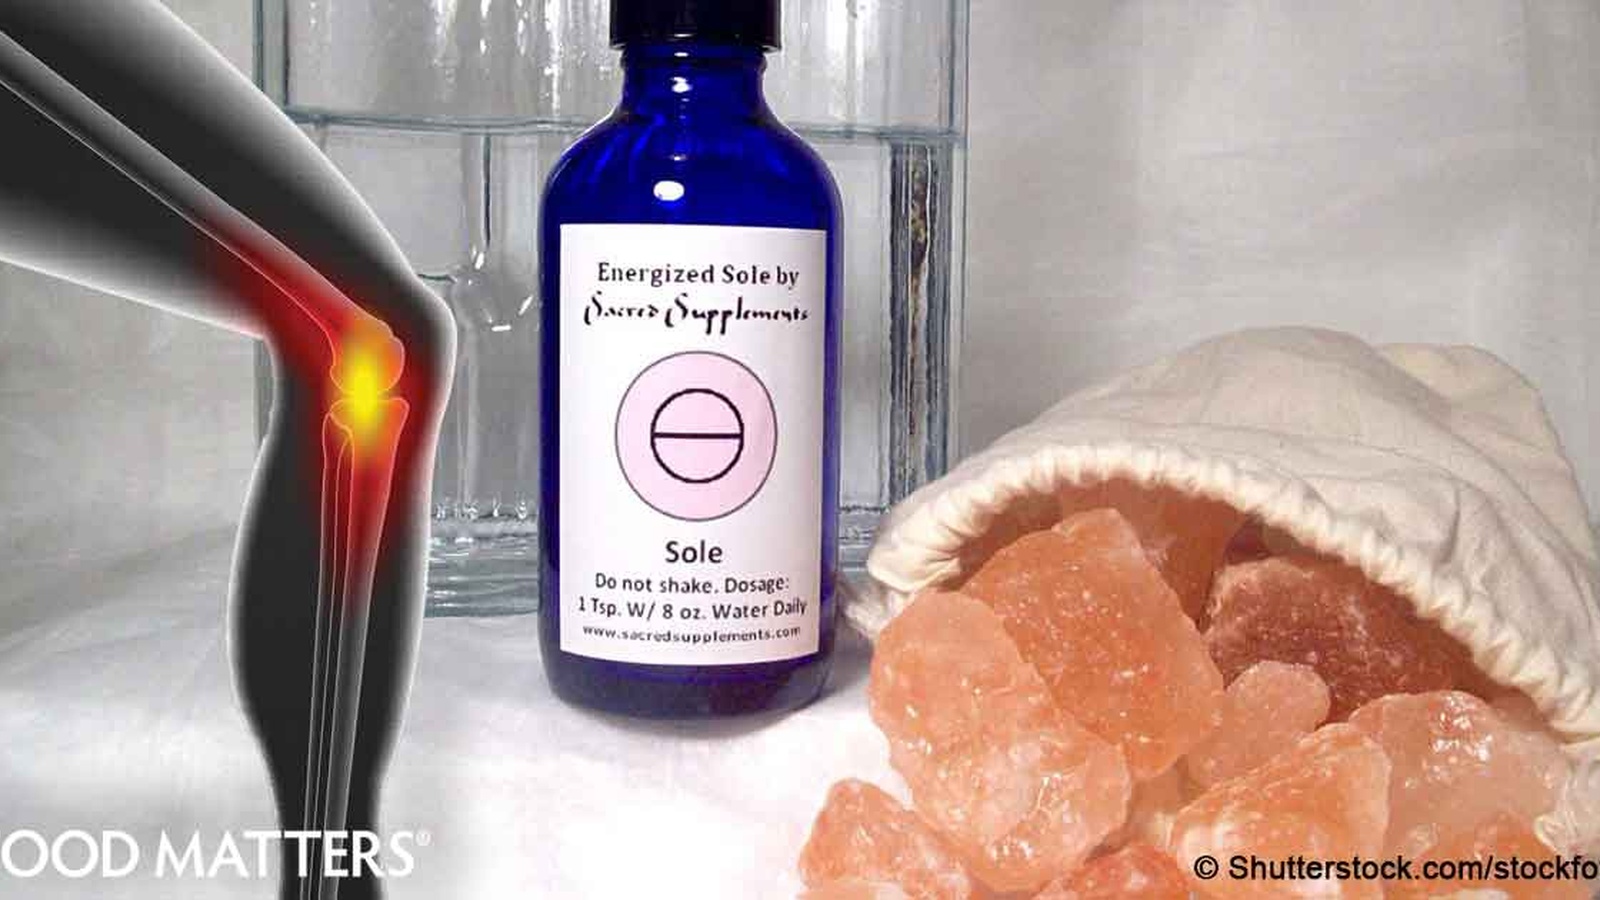 This Amazing Himalayan Pink Salt Mixture That Can Help Treat 14 Health Conditions